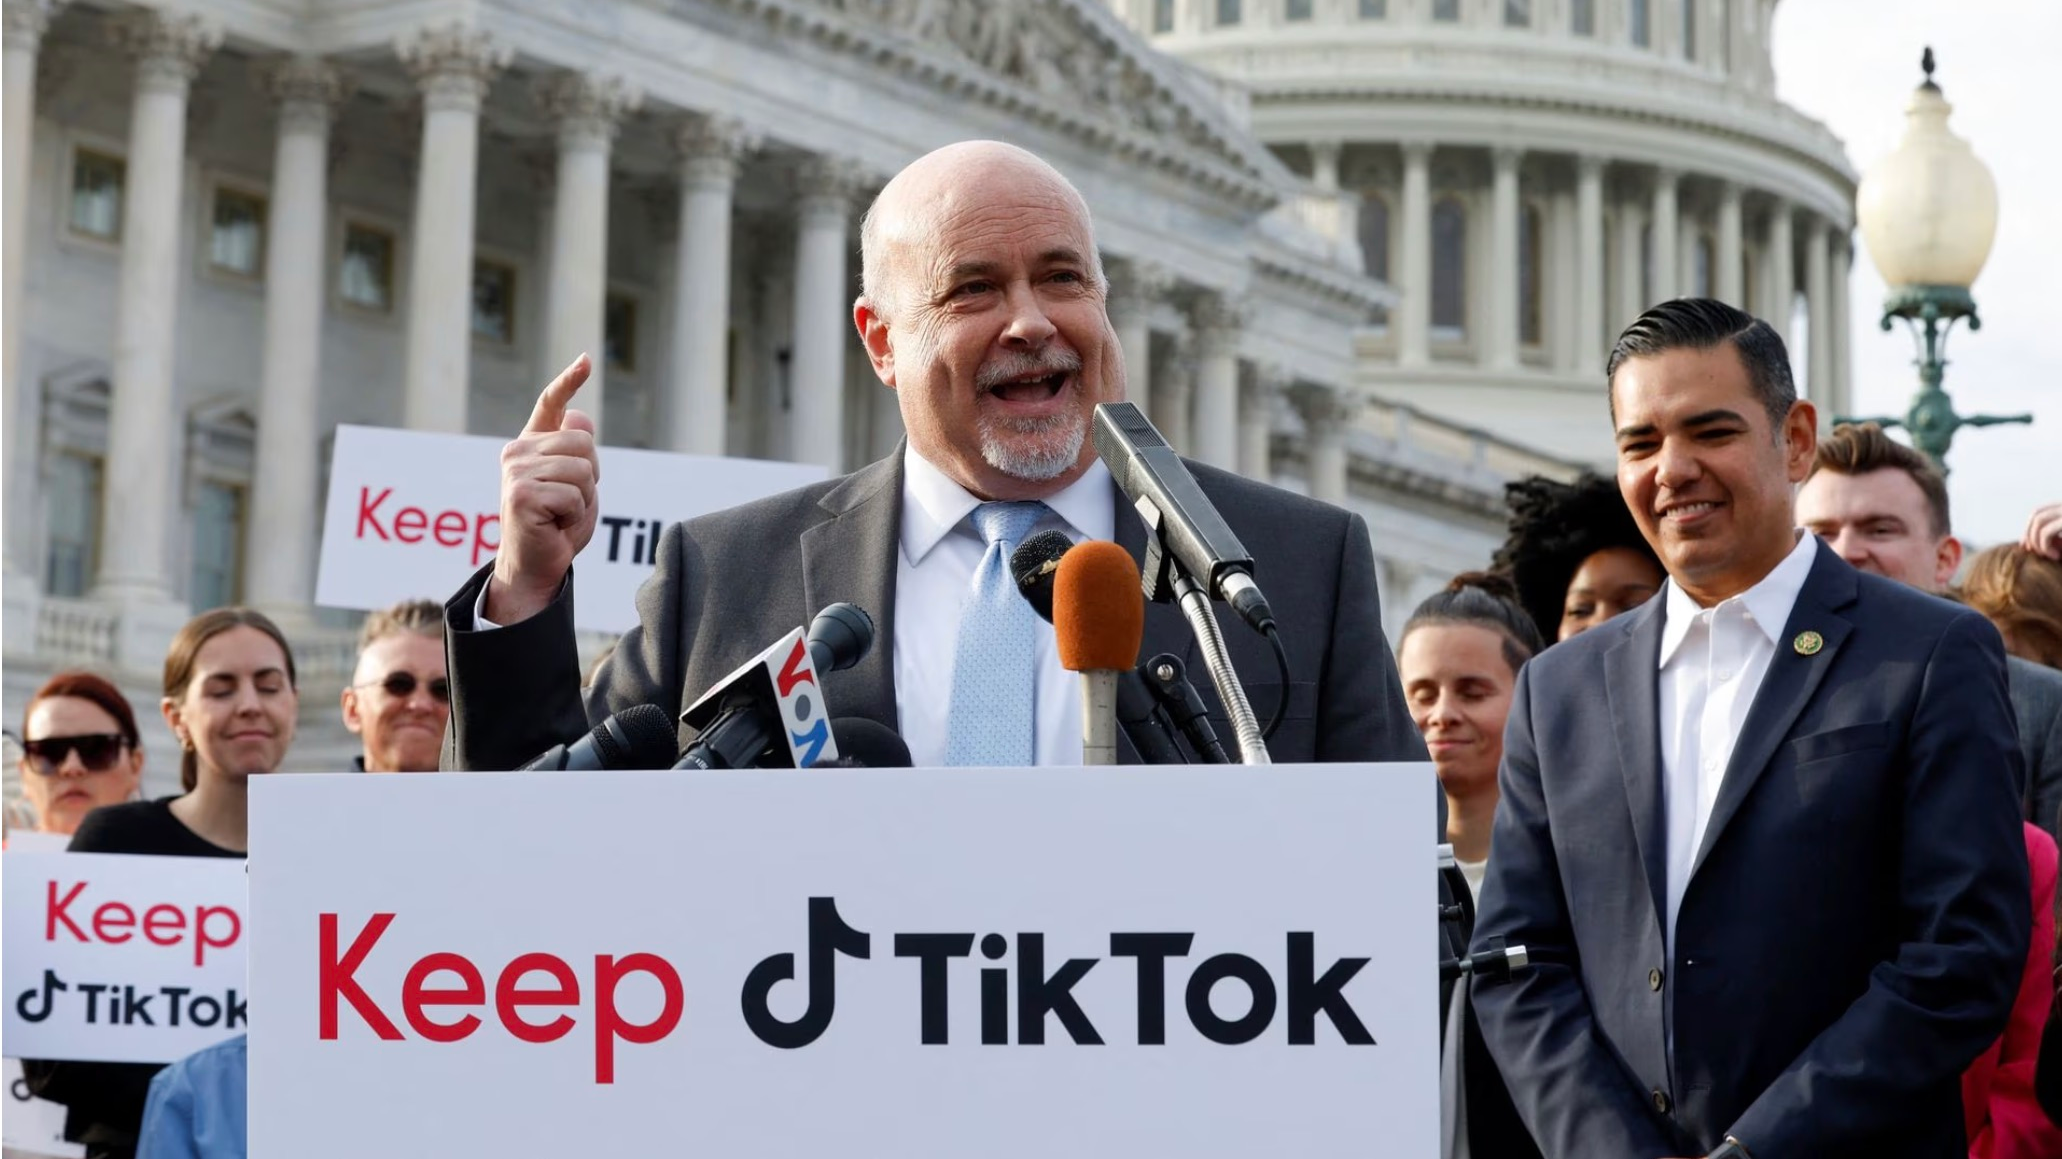 U.S. Representative Mark Pocan joins TikTok creators at a news conference to speak out against banning TikTok at the House Triangle outside the United States Capitol in Washington, U.S., March 22, 2023. /Reuters